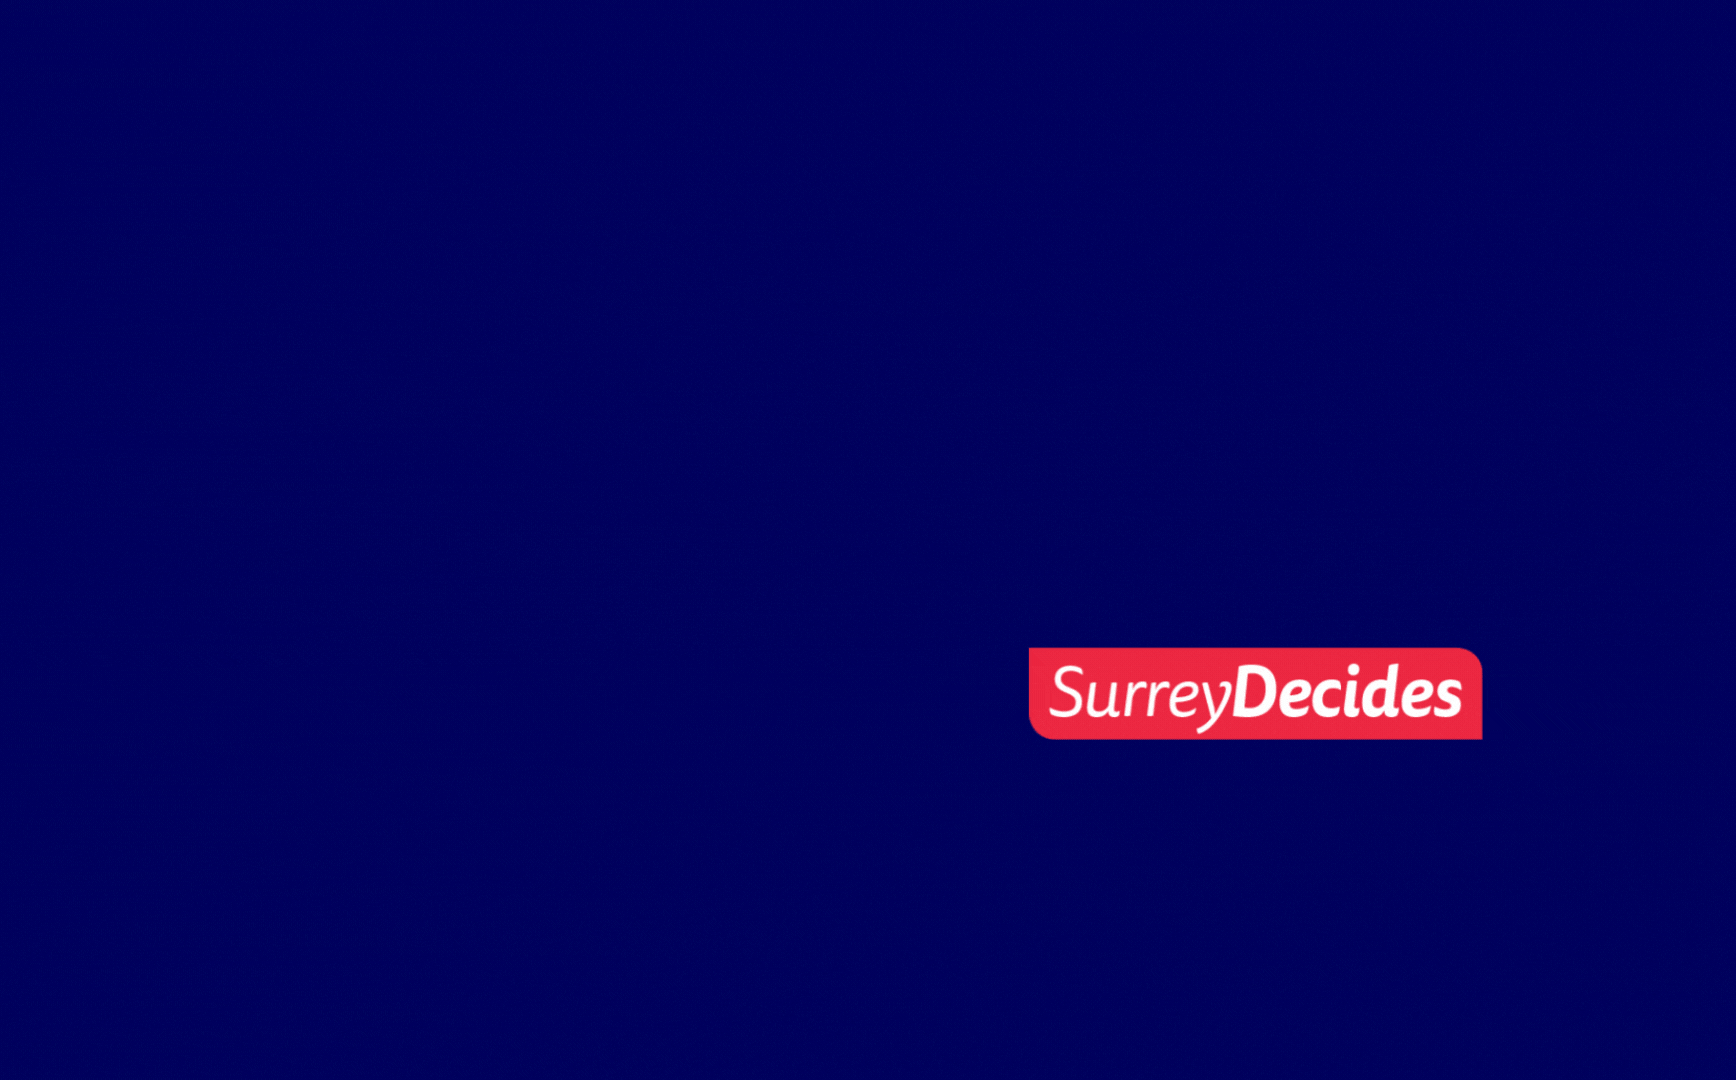 Meet The Candidates – Who are the students running in Surrey Decides?